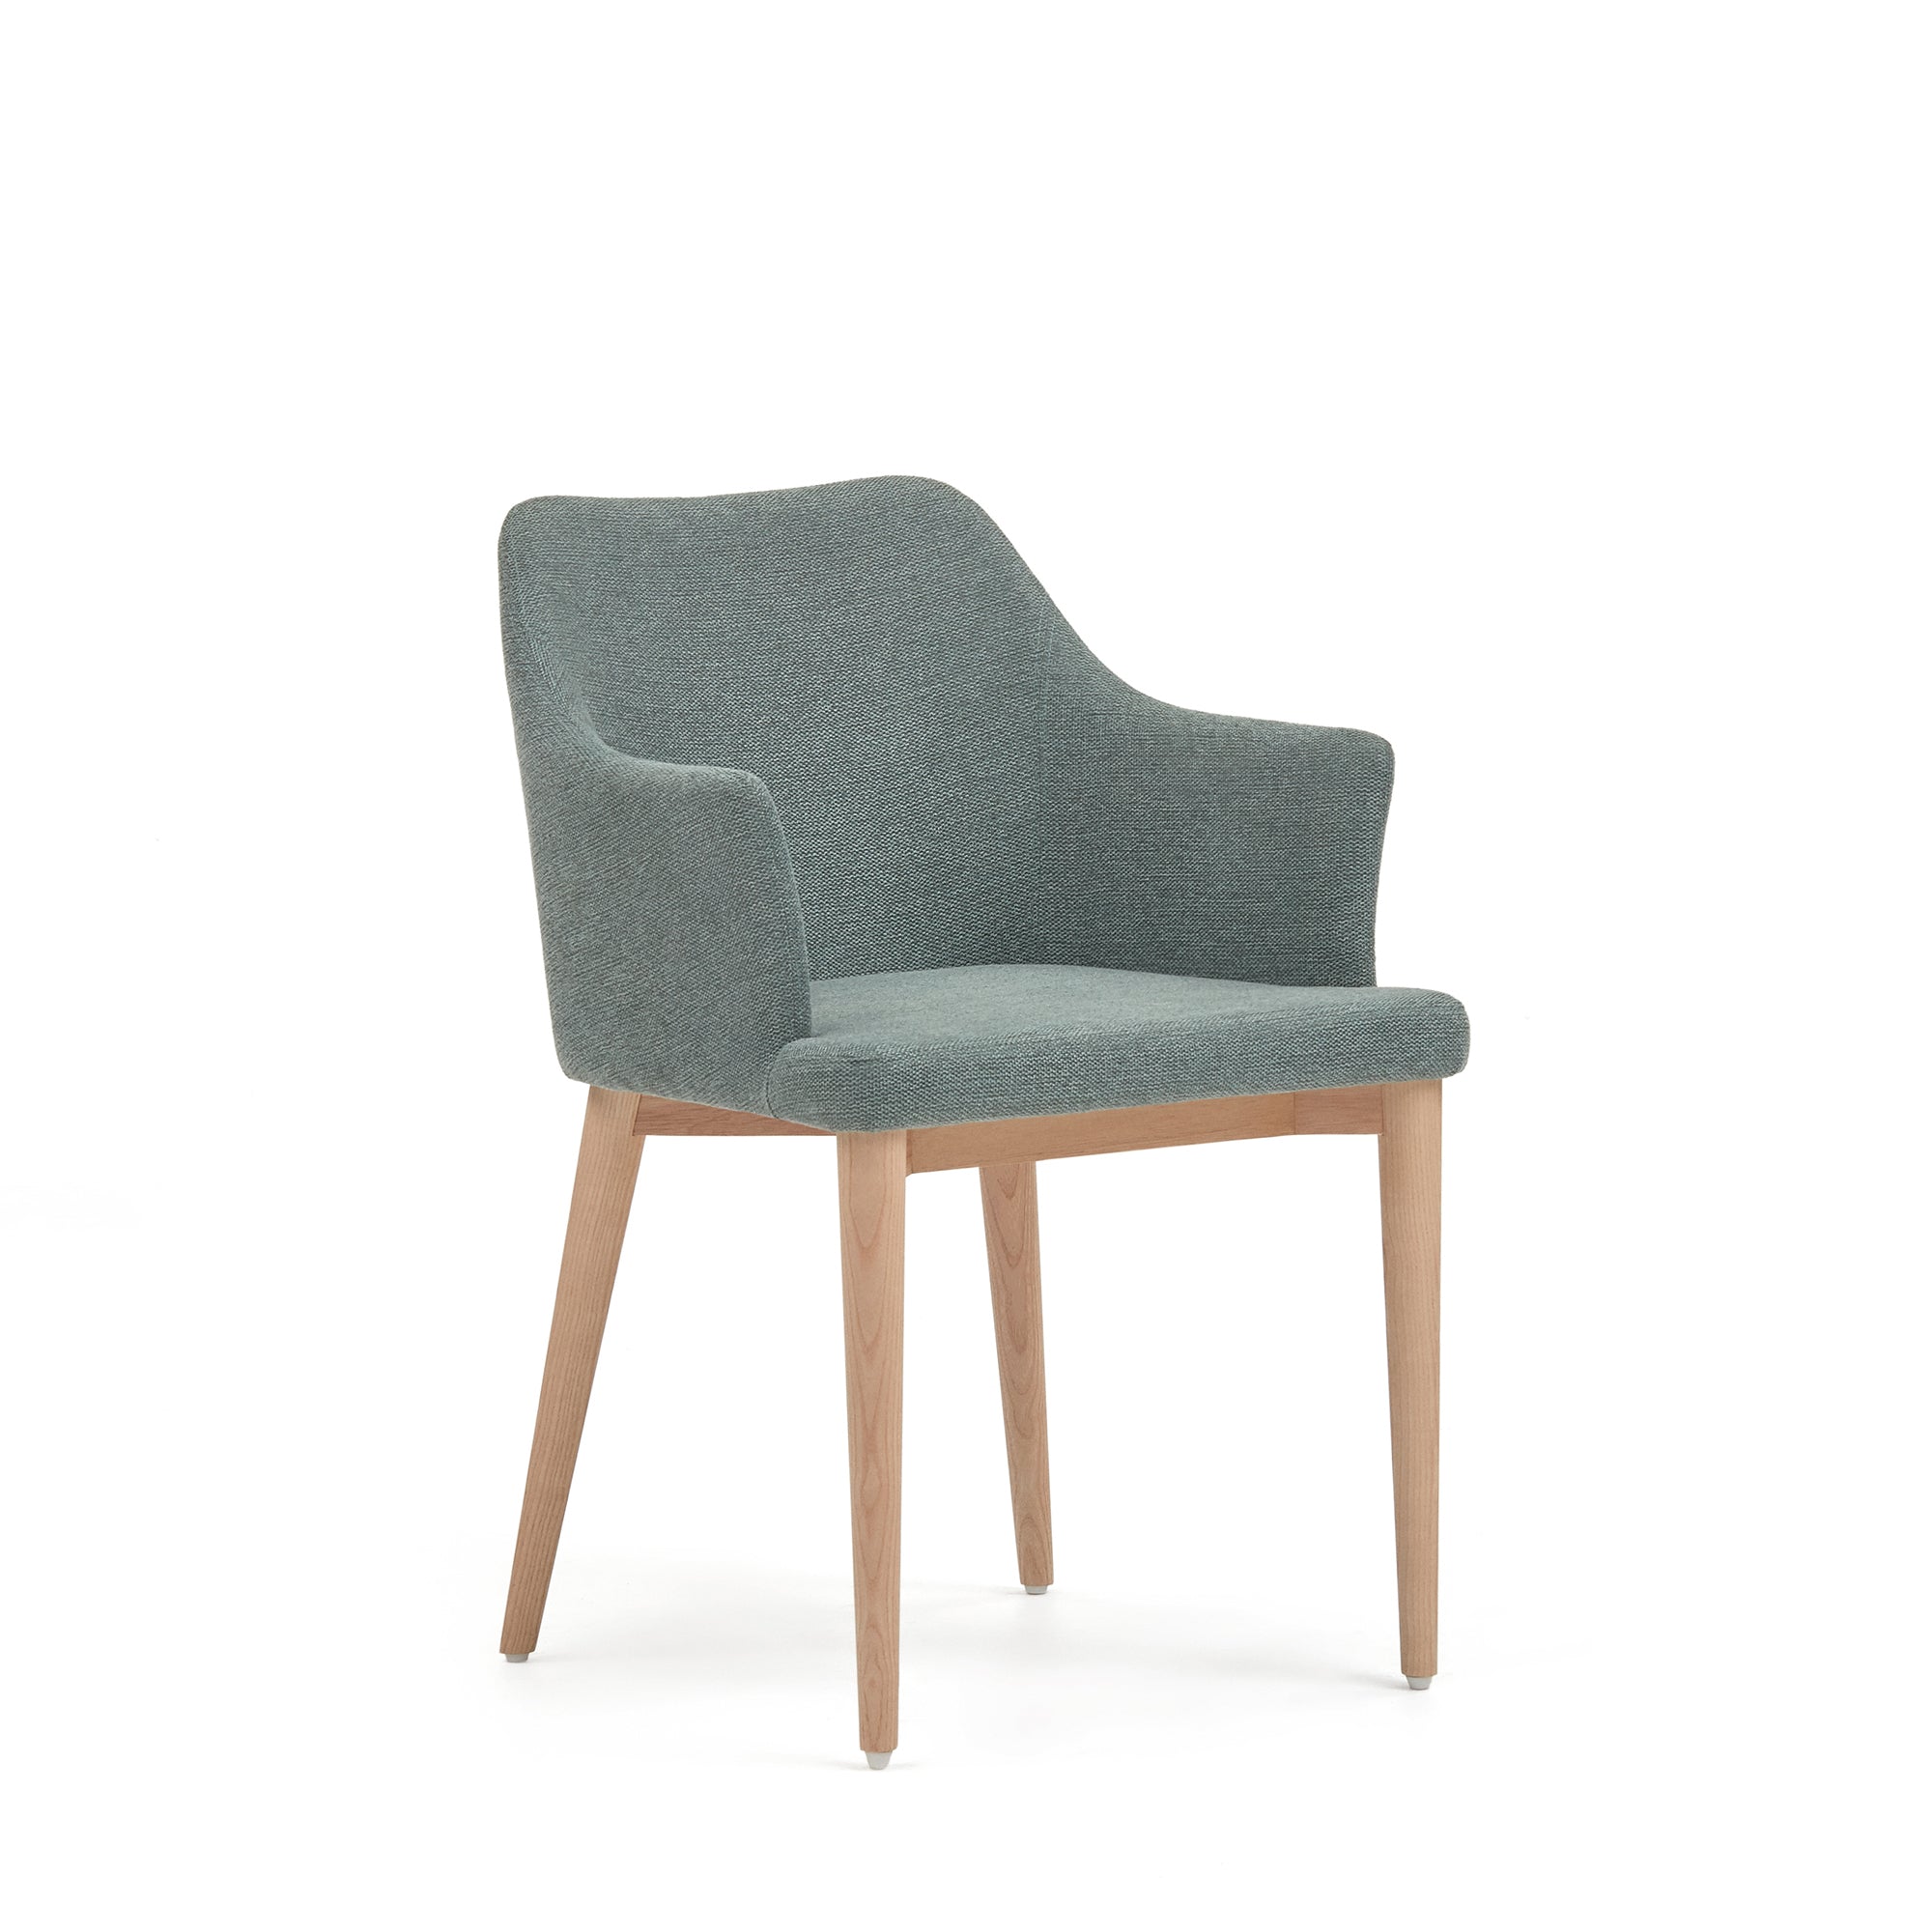 Croft chair in dark green chenille with solid ash wood legs